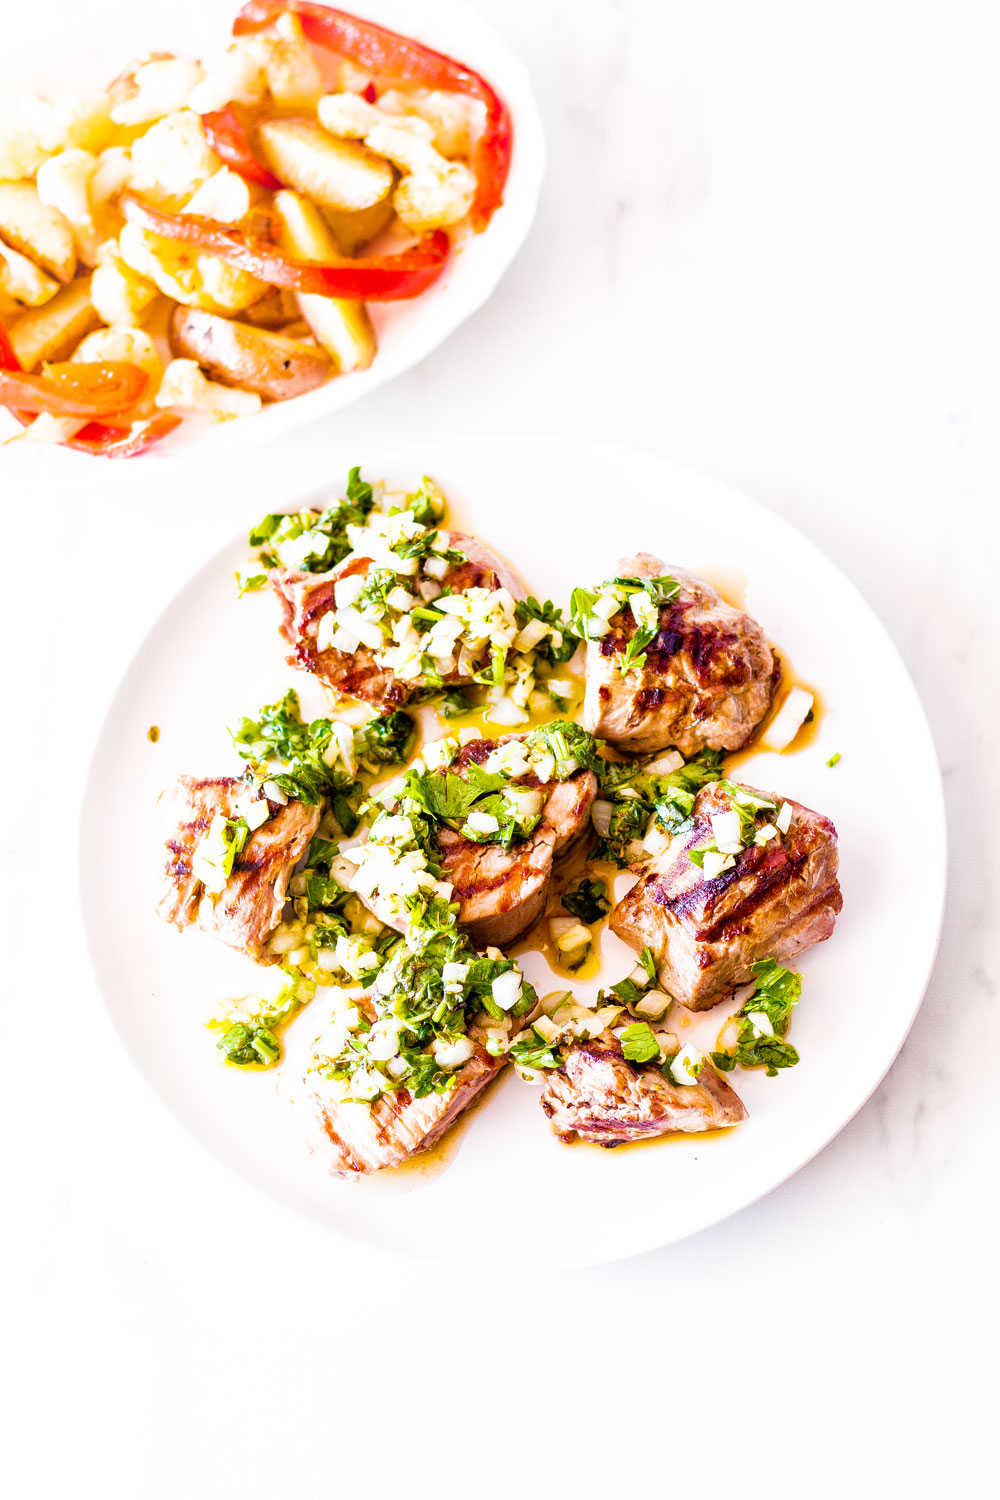 These Grilled Pork Medallions with Salsa Verde are an easy and delicious dish, perfect for summer entertaining! https://www.spotebi.com/recipes/grilled-pork-medallions-with-salsa-verde/